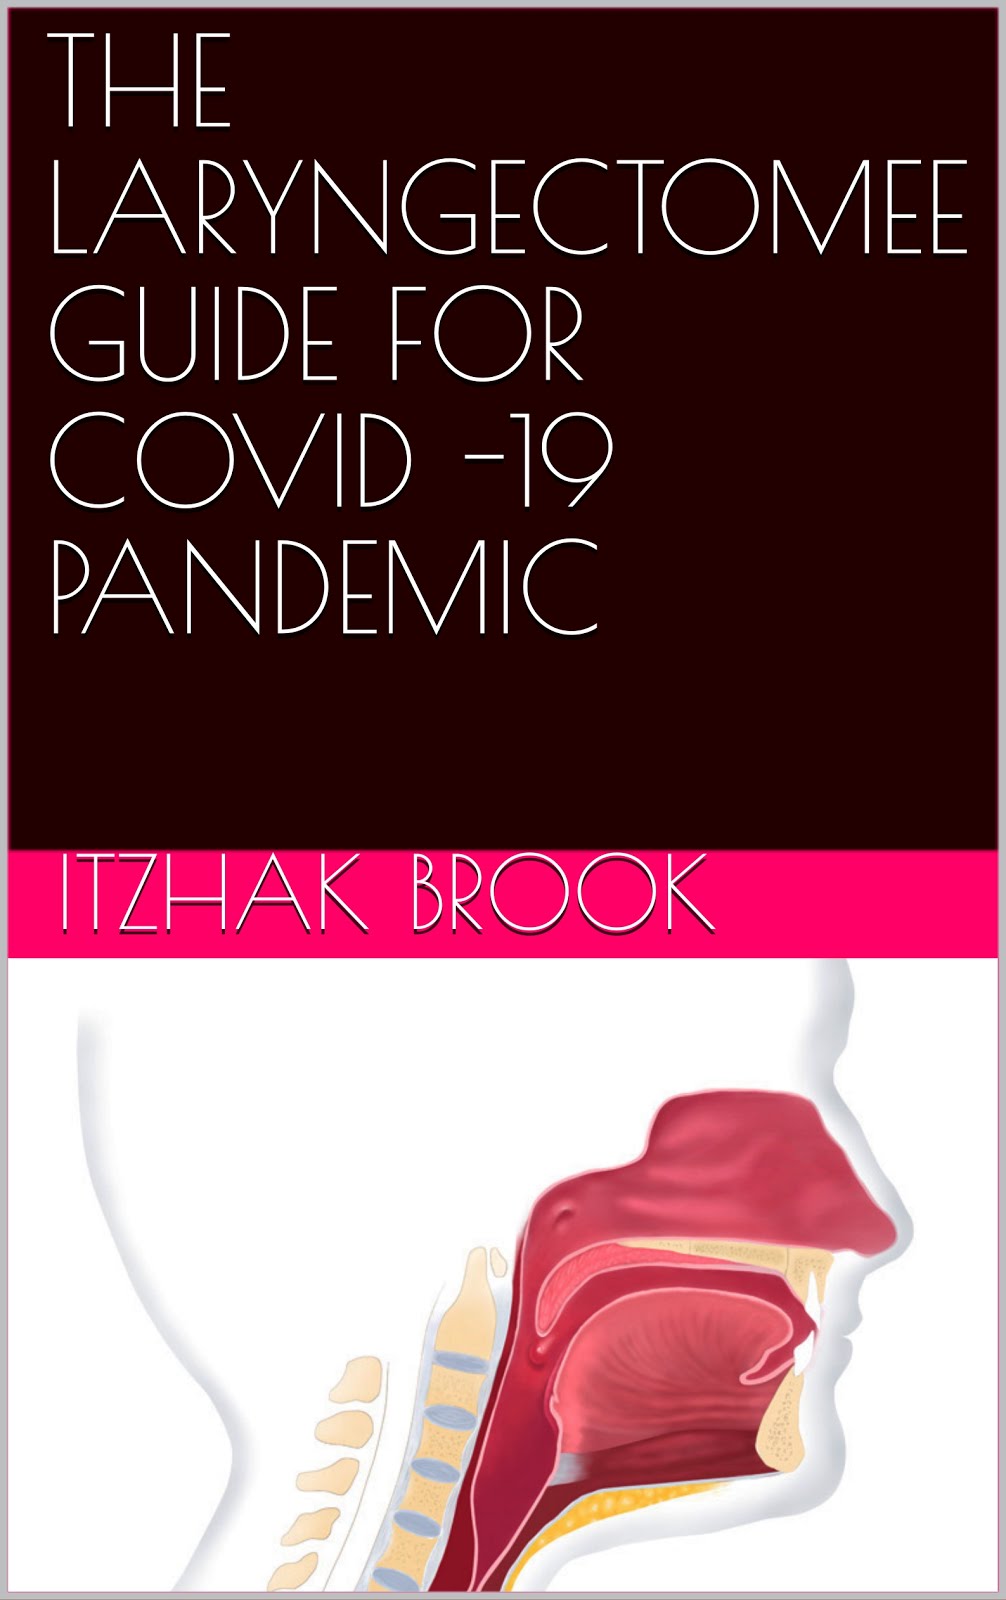 Dr. Brook's book: "Laryngectomee Guide for COVID-19 Pandemic"